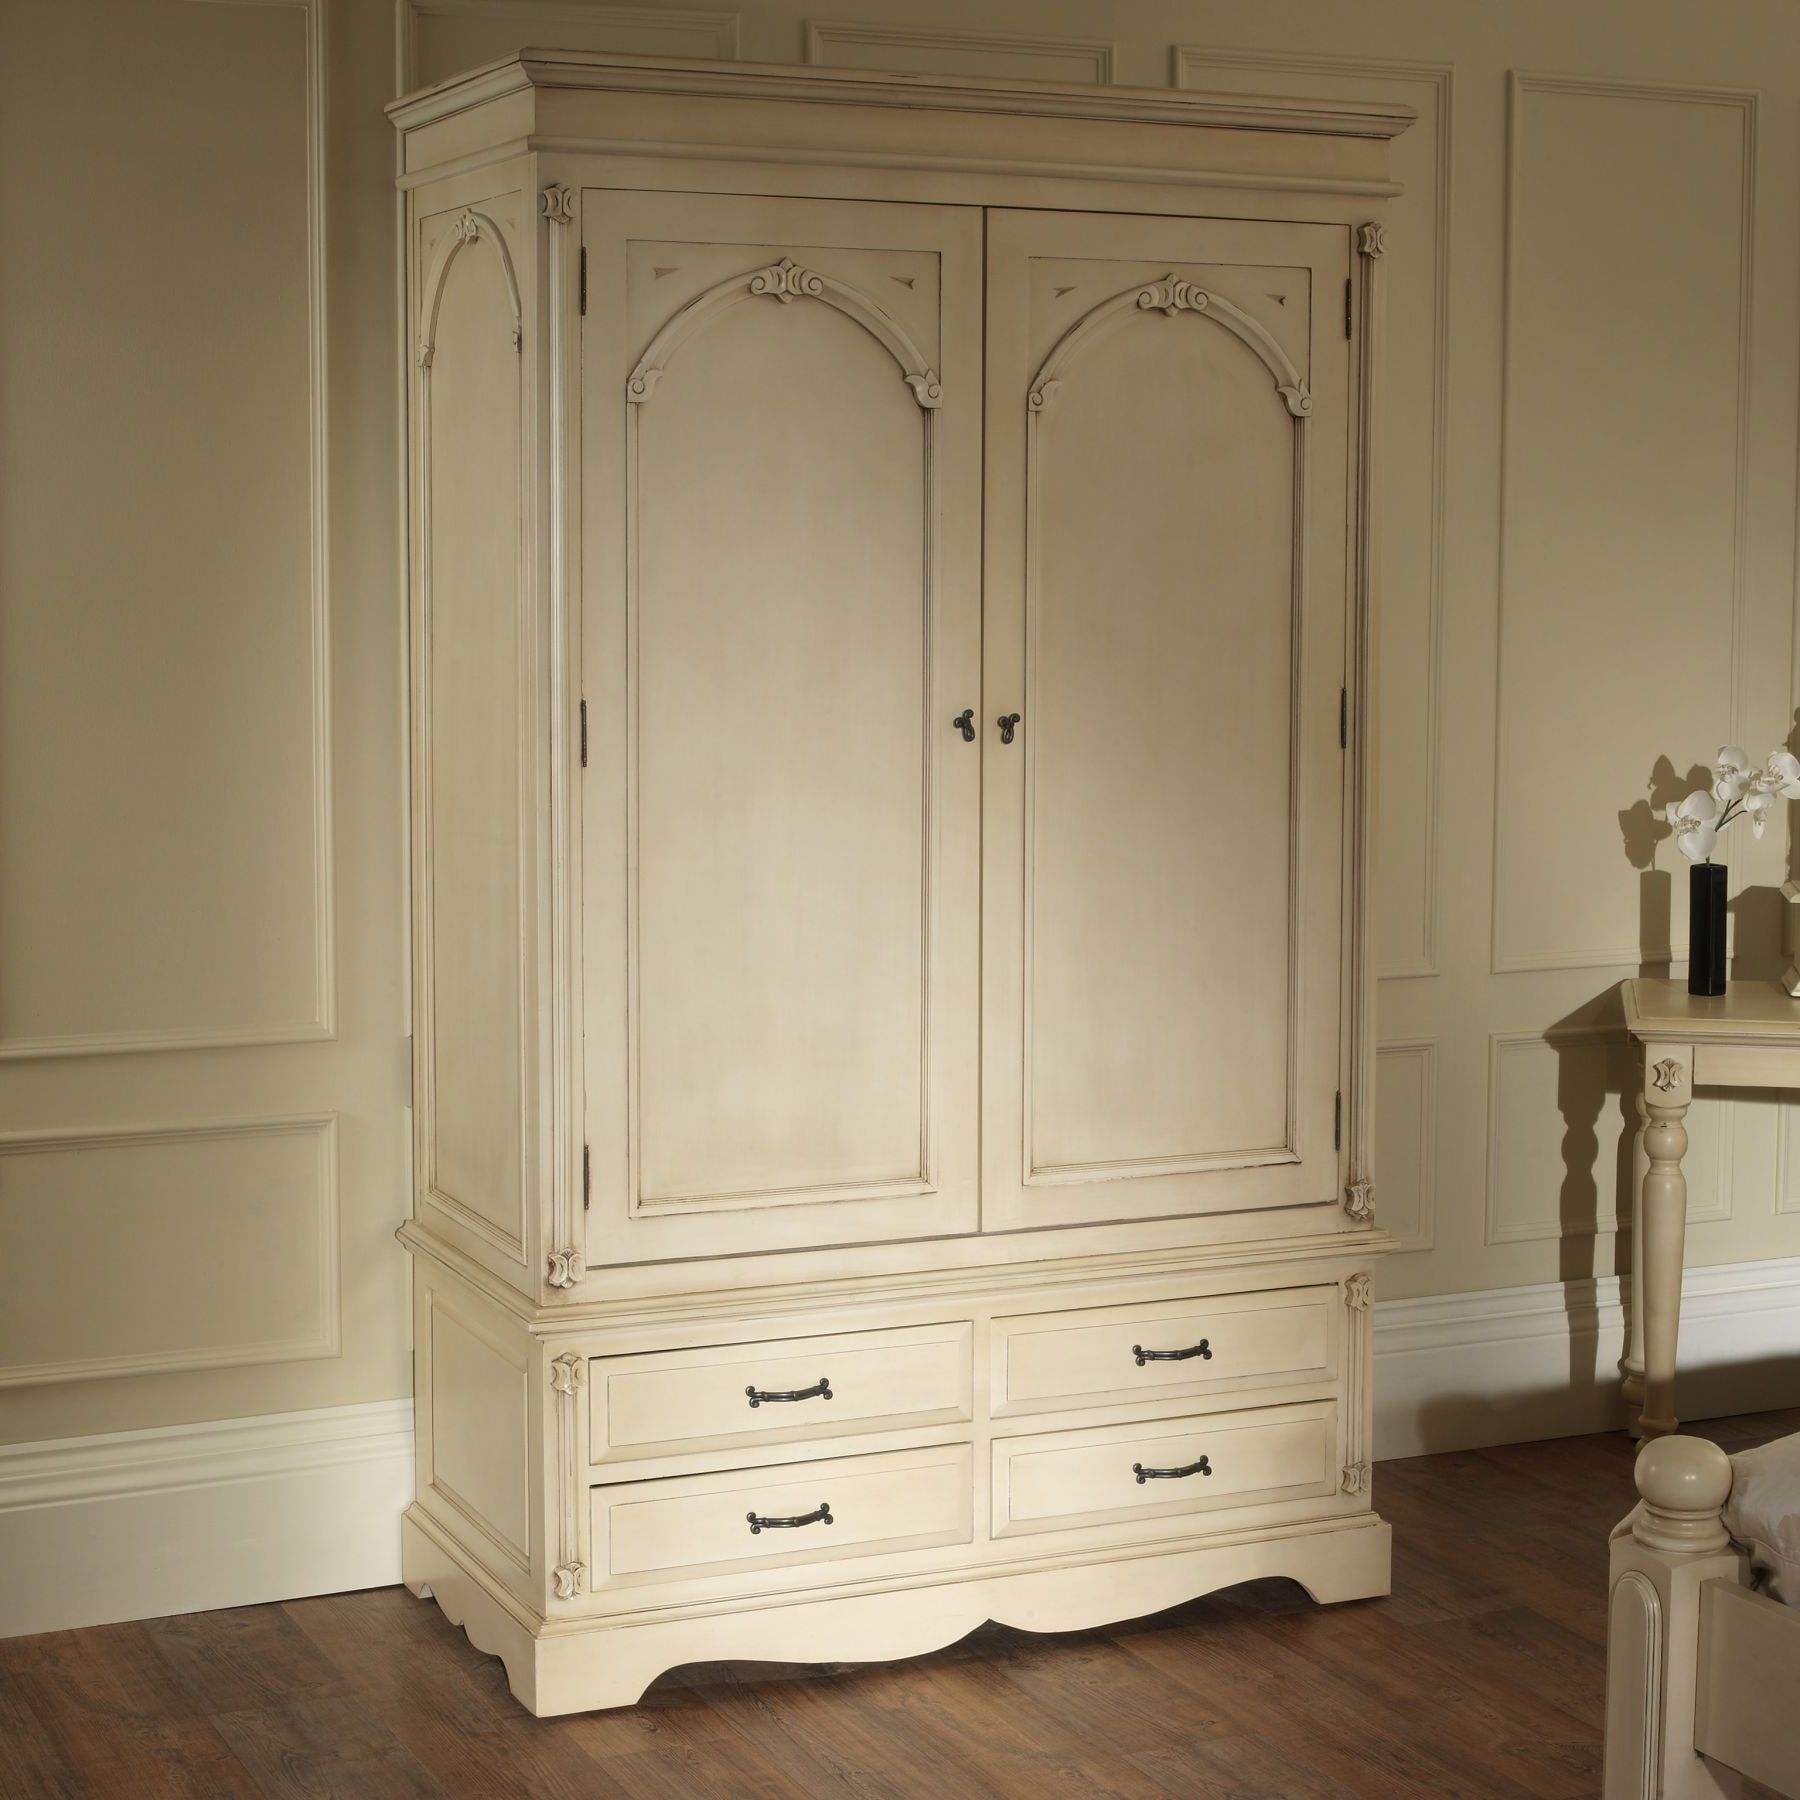 Victorian Antique French Wardrobe Works Well Alongside Our Shabby Chic  Furniture Pertaining To Vintage Shabby Chic Wardrobes (Gallery 16 of 20)